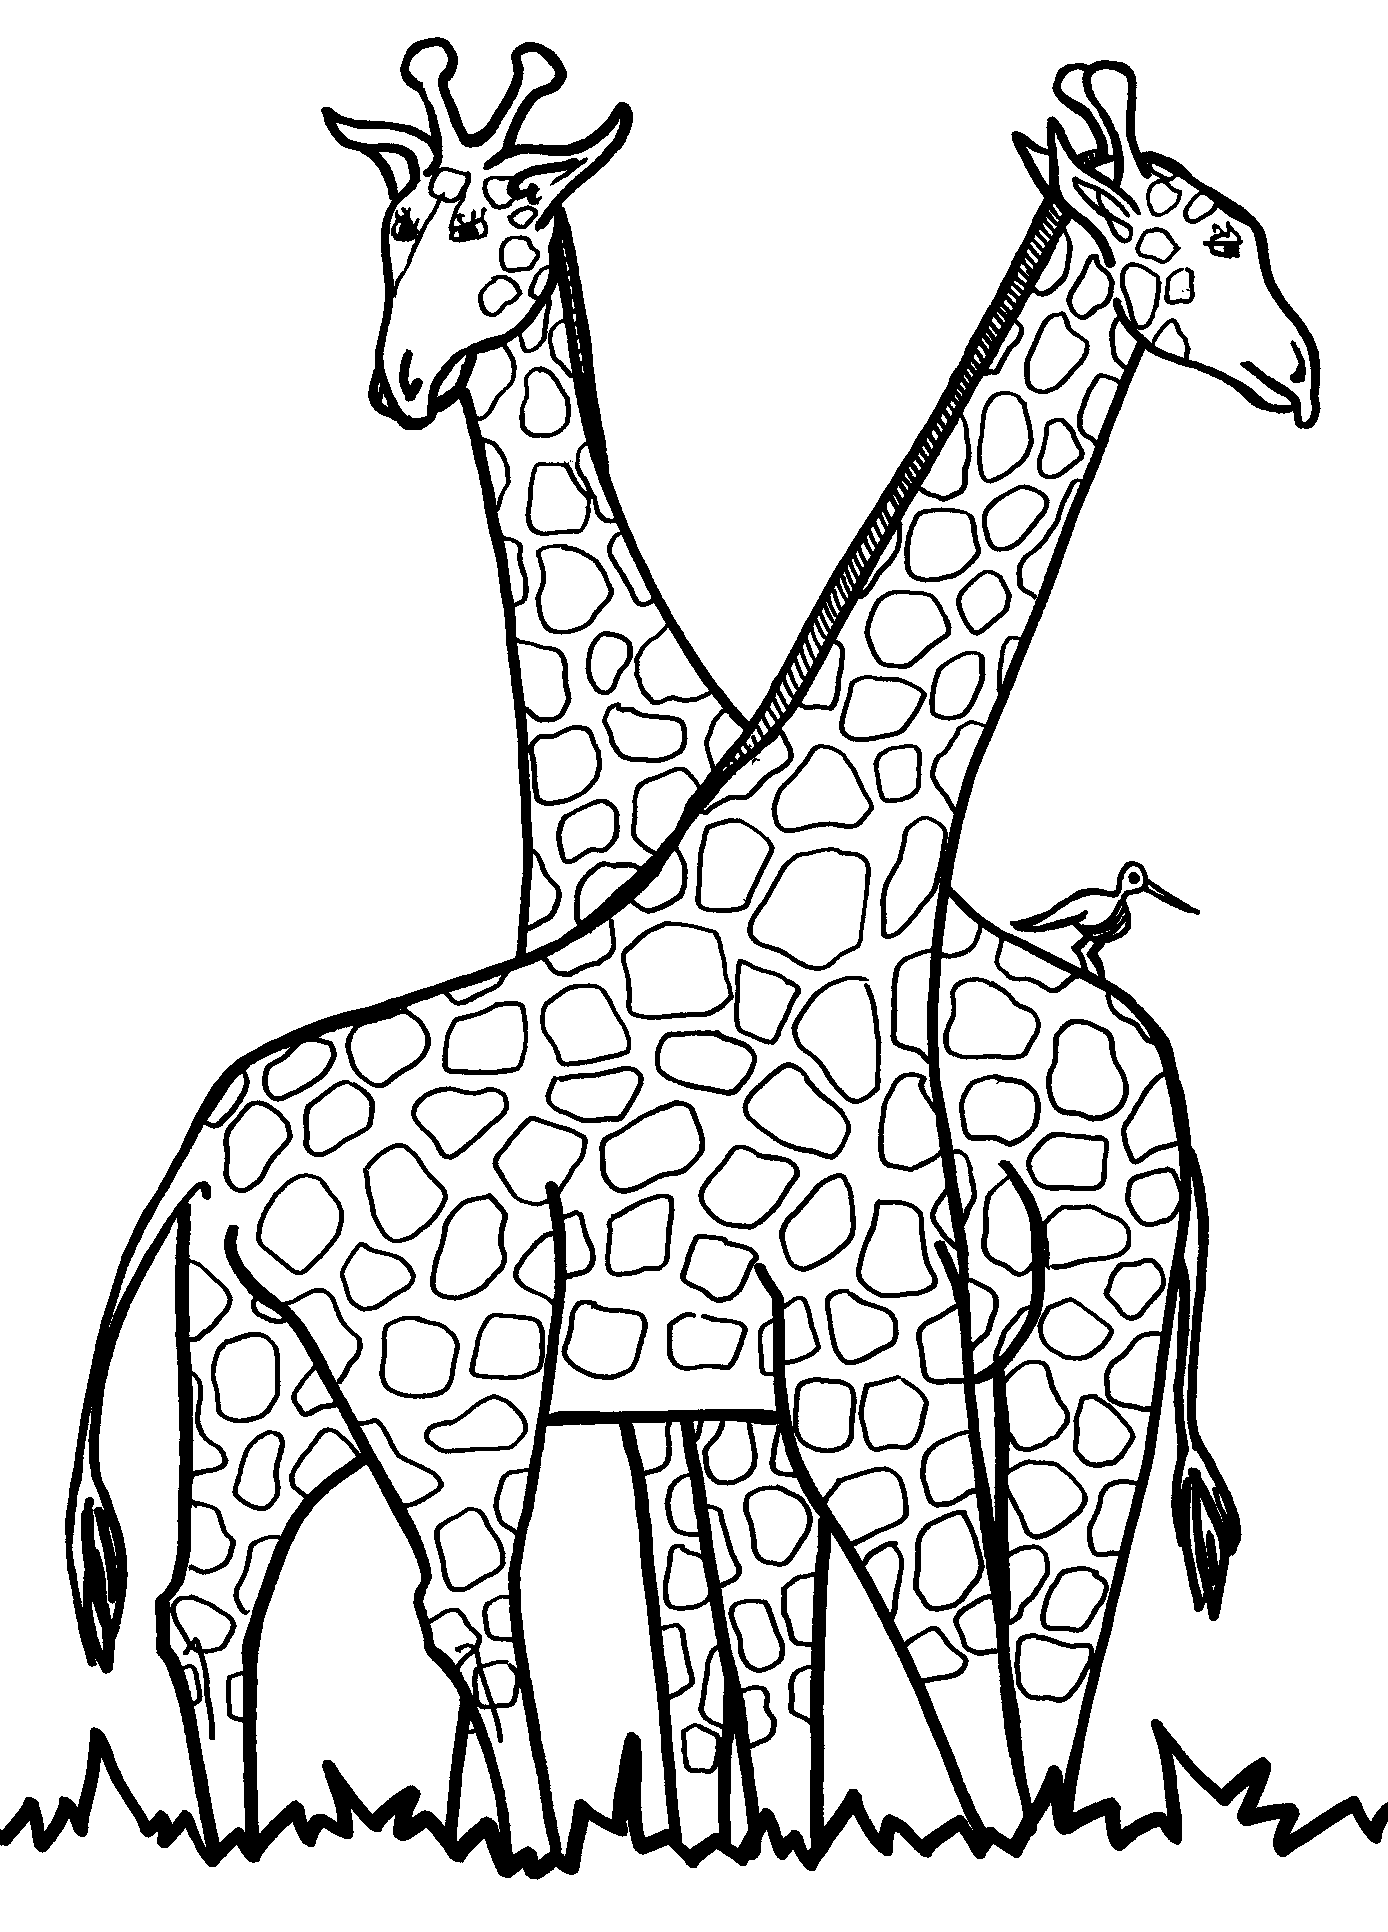 Giraffe coloring pages.